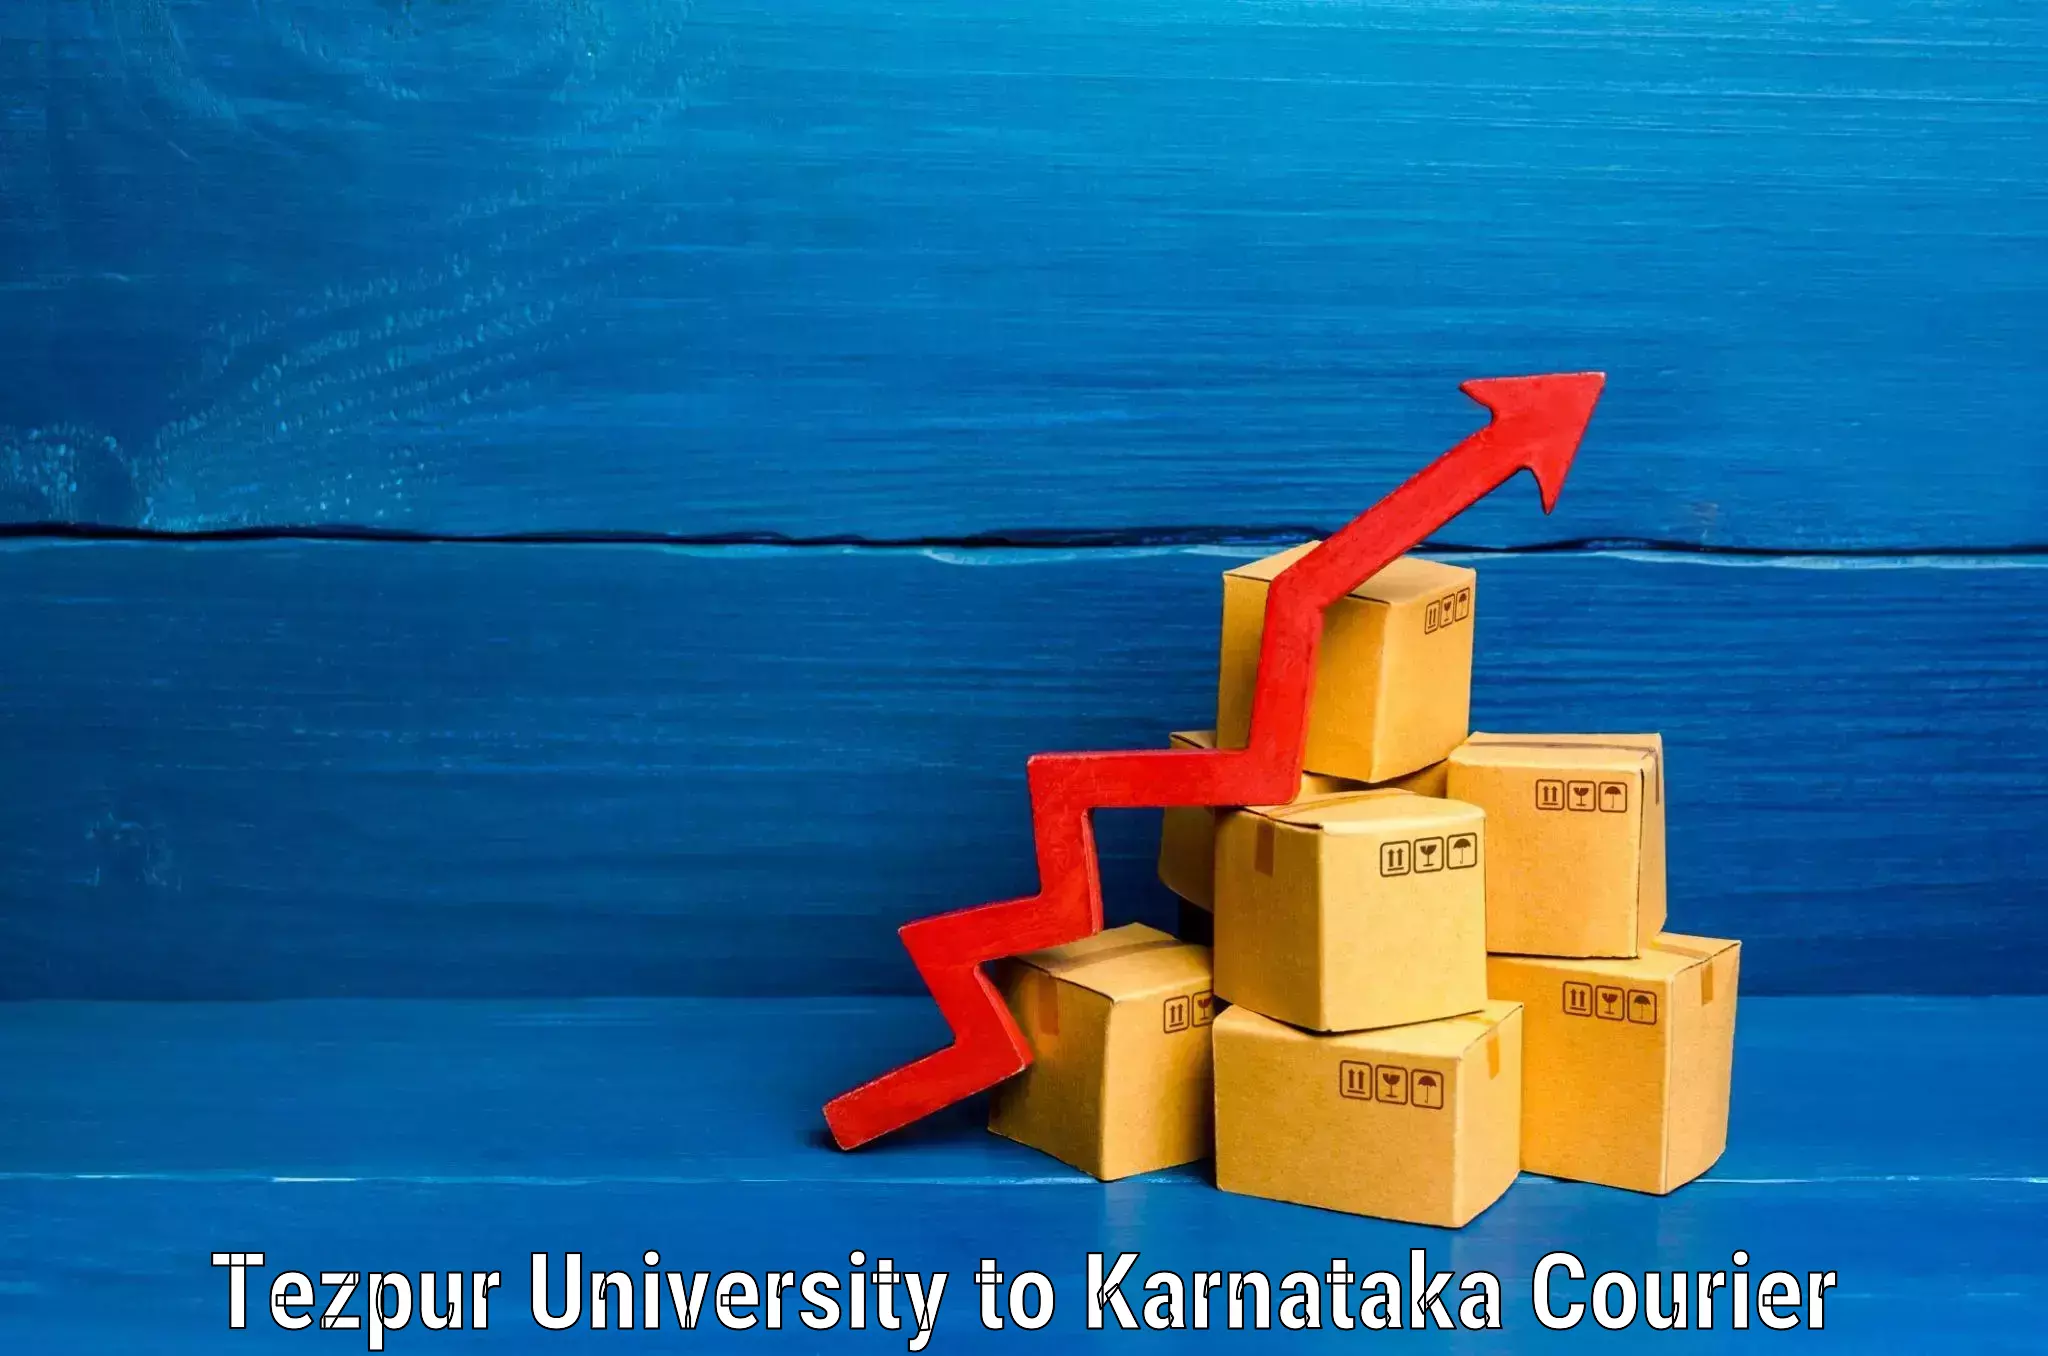 Luggage delivery system Tezpur University to Gonikoppal